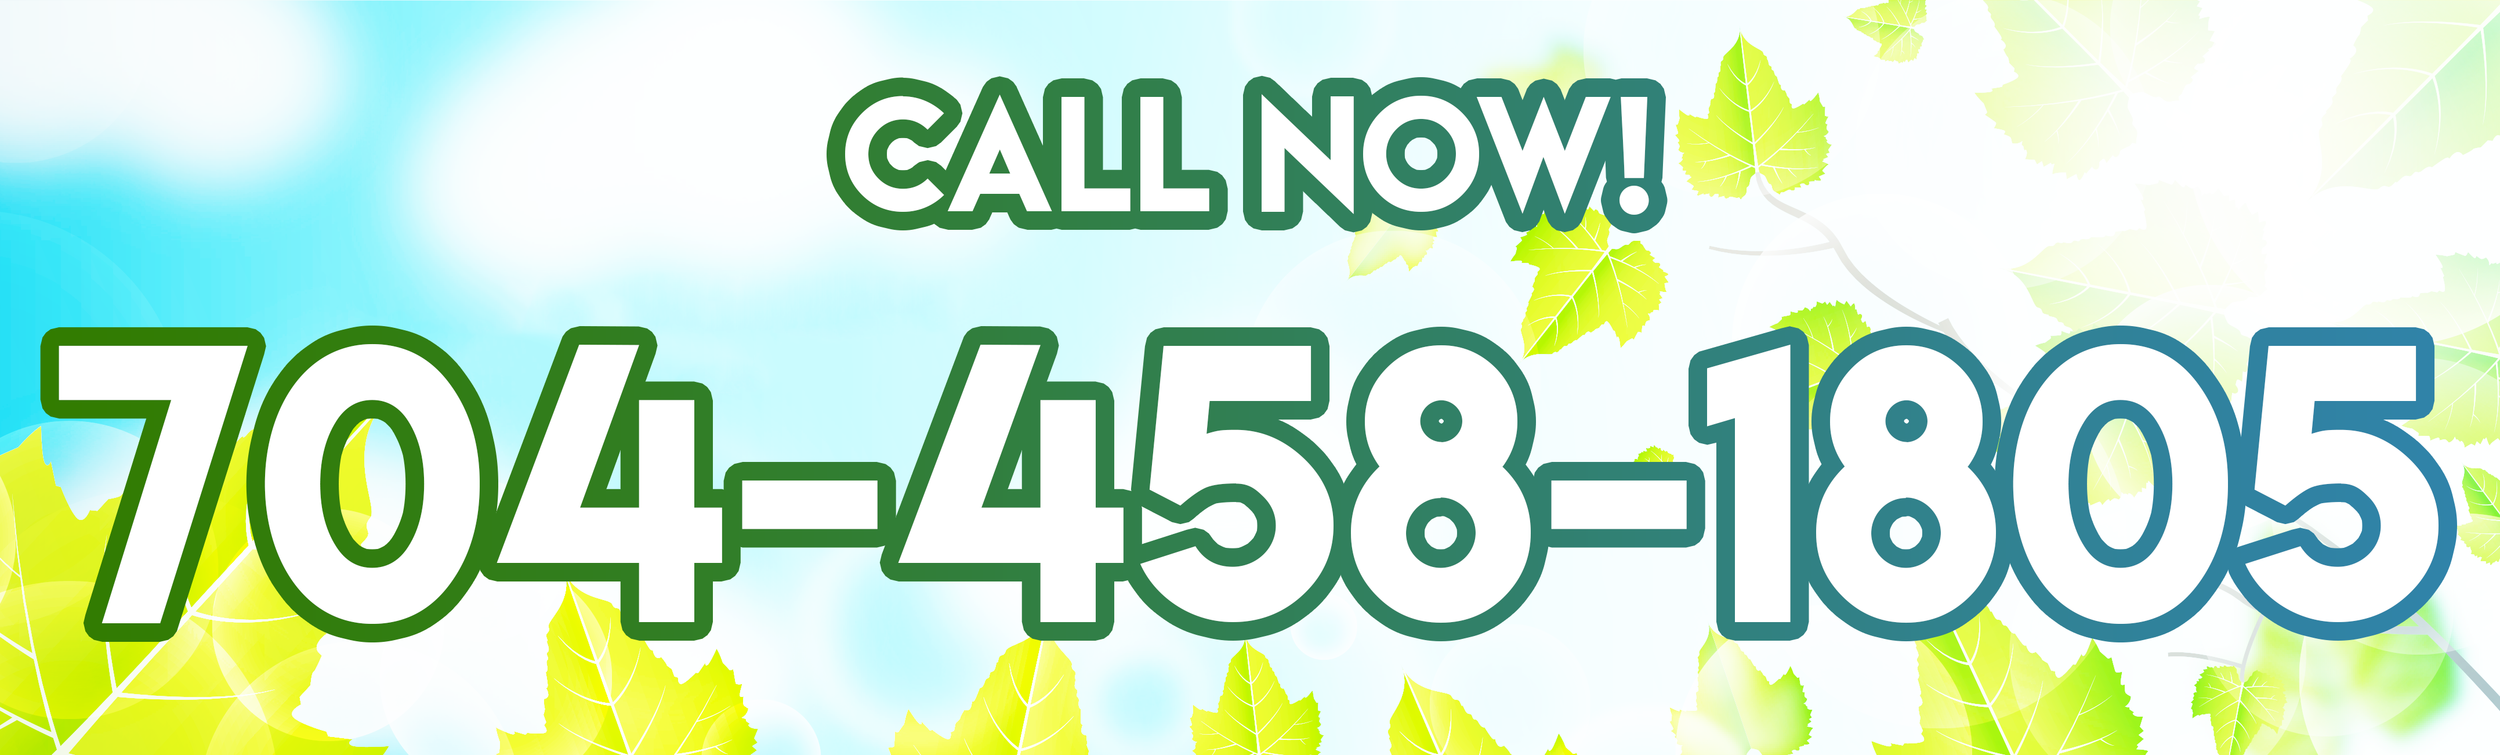 ad_special_spring_callNow_banner.png